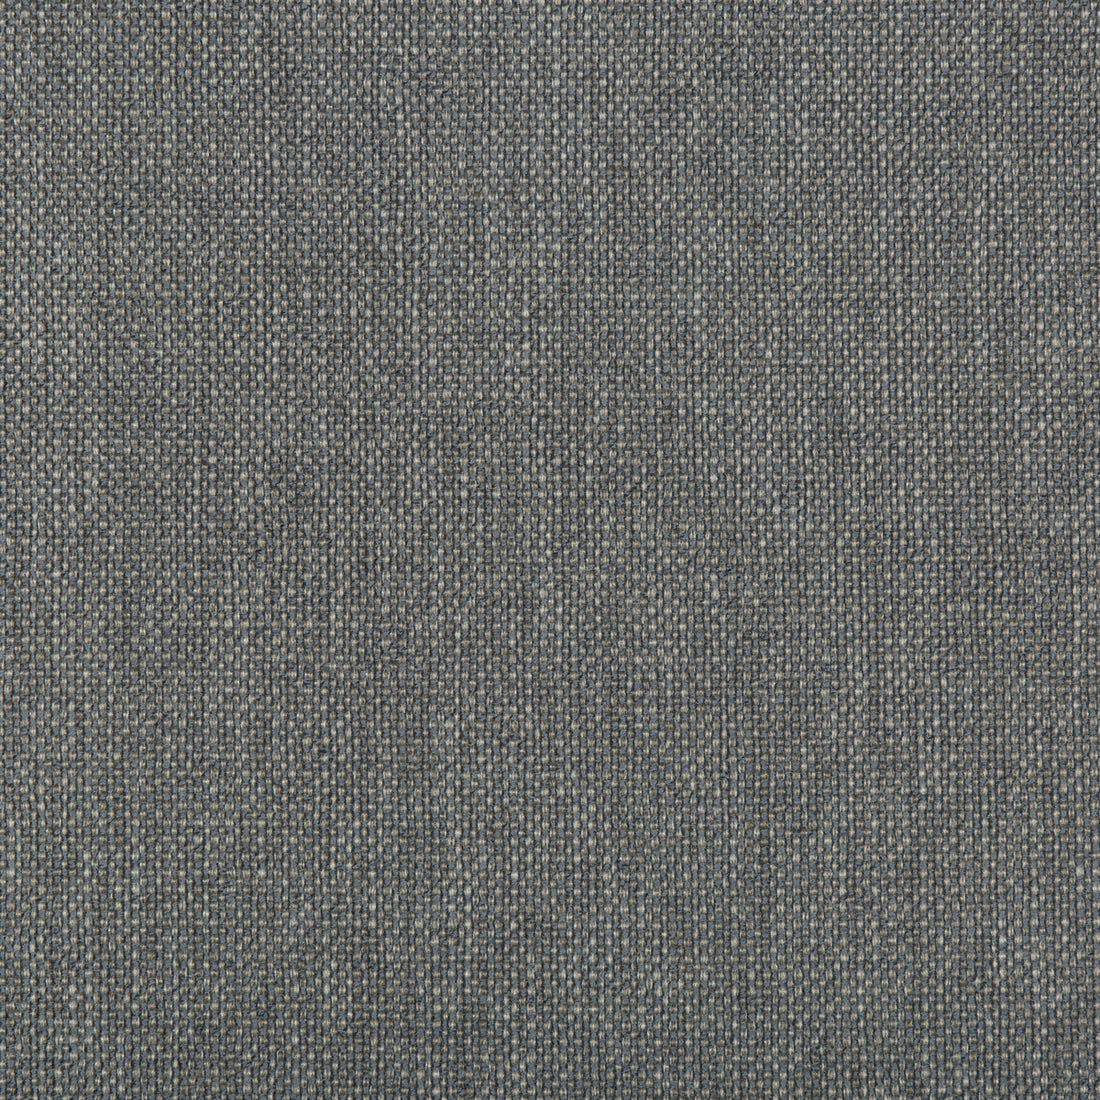 Williams fabric in heron color - pattern 35744.511.0 - by Kravet Contract in the Value Kravetarmor collection